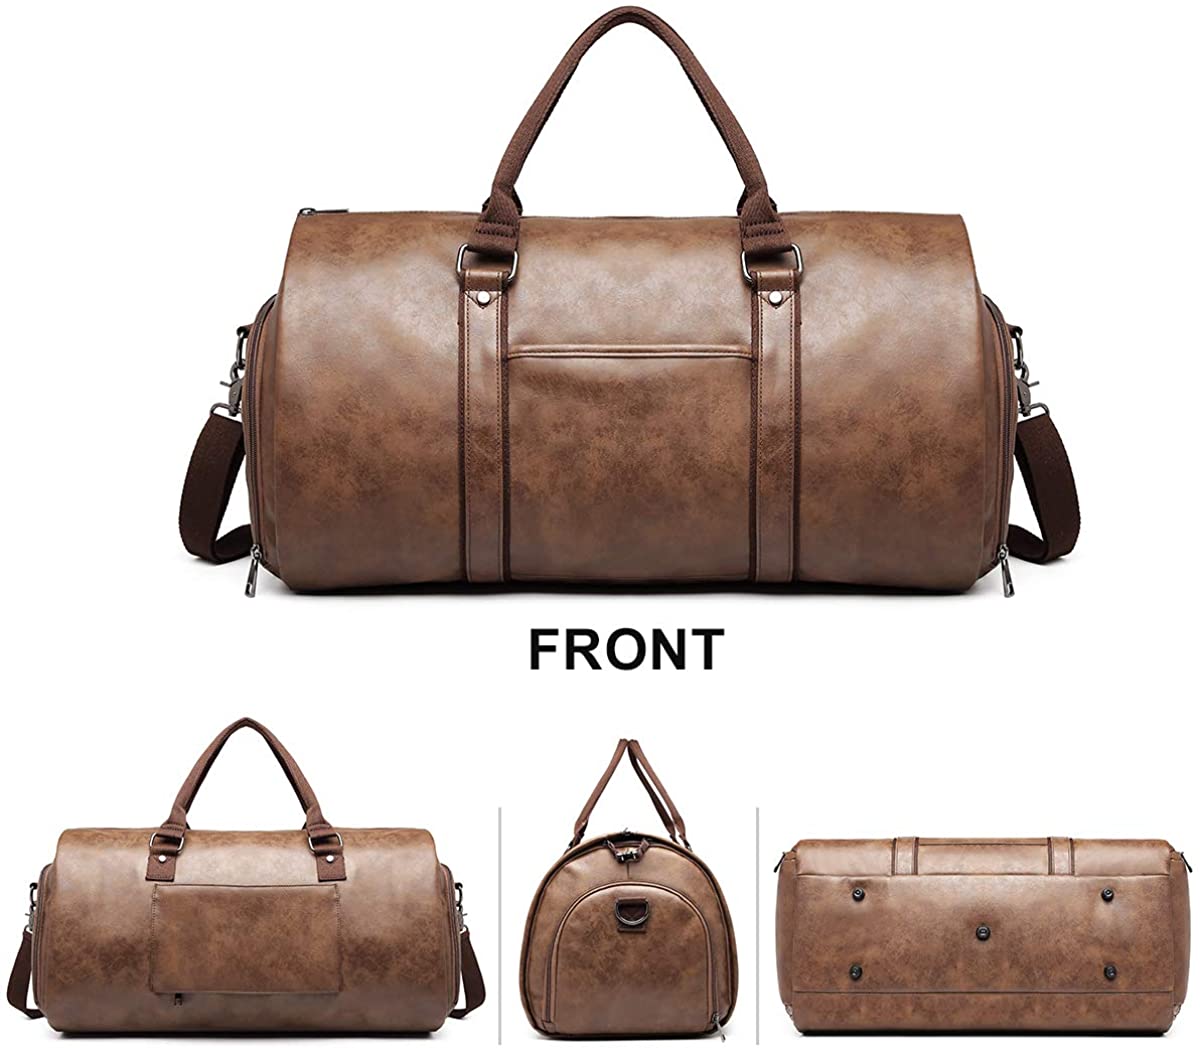 Leather Travel Duffle Bag for Men, Woven Carry On